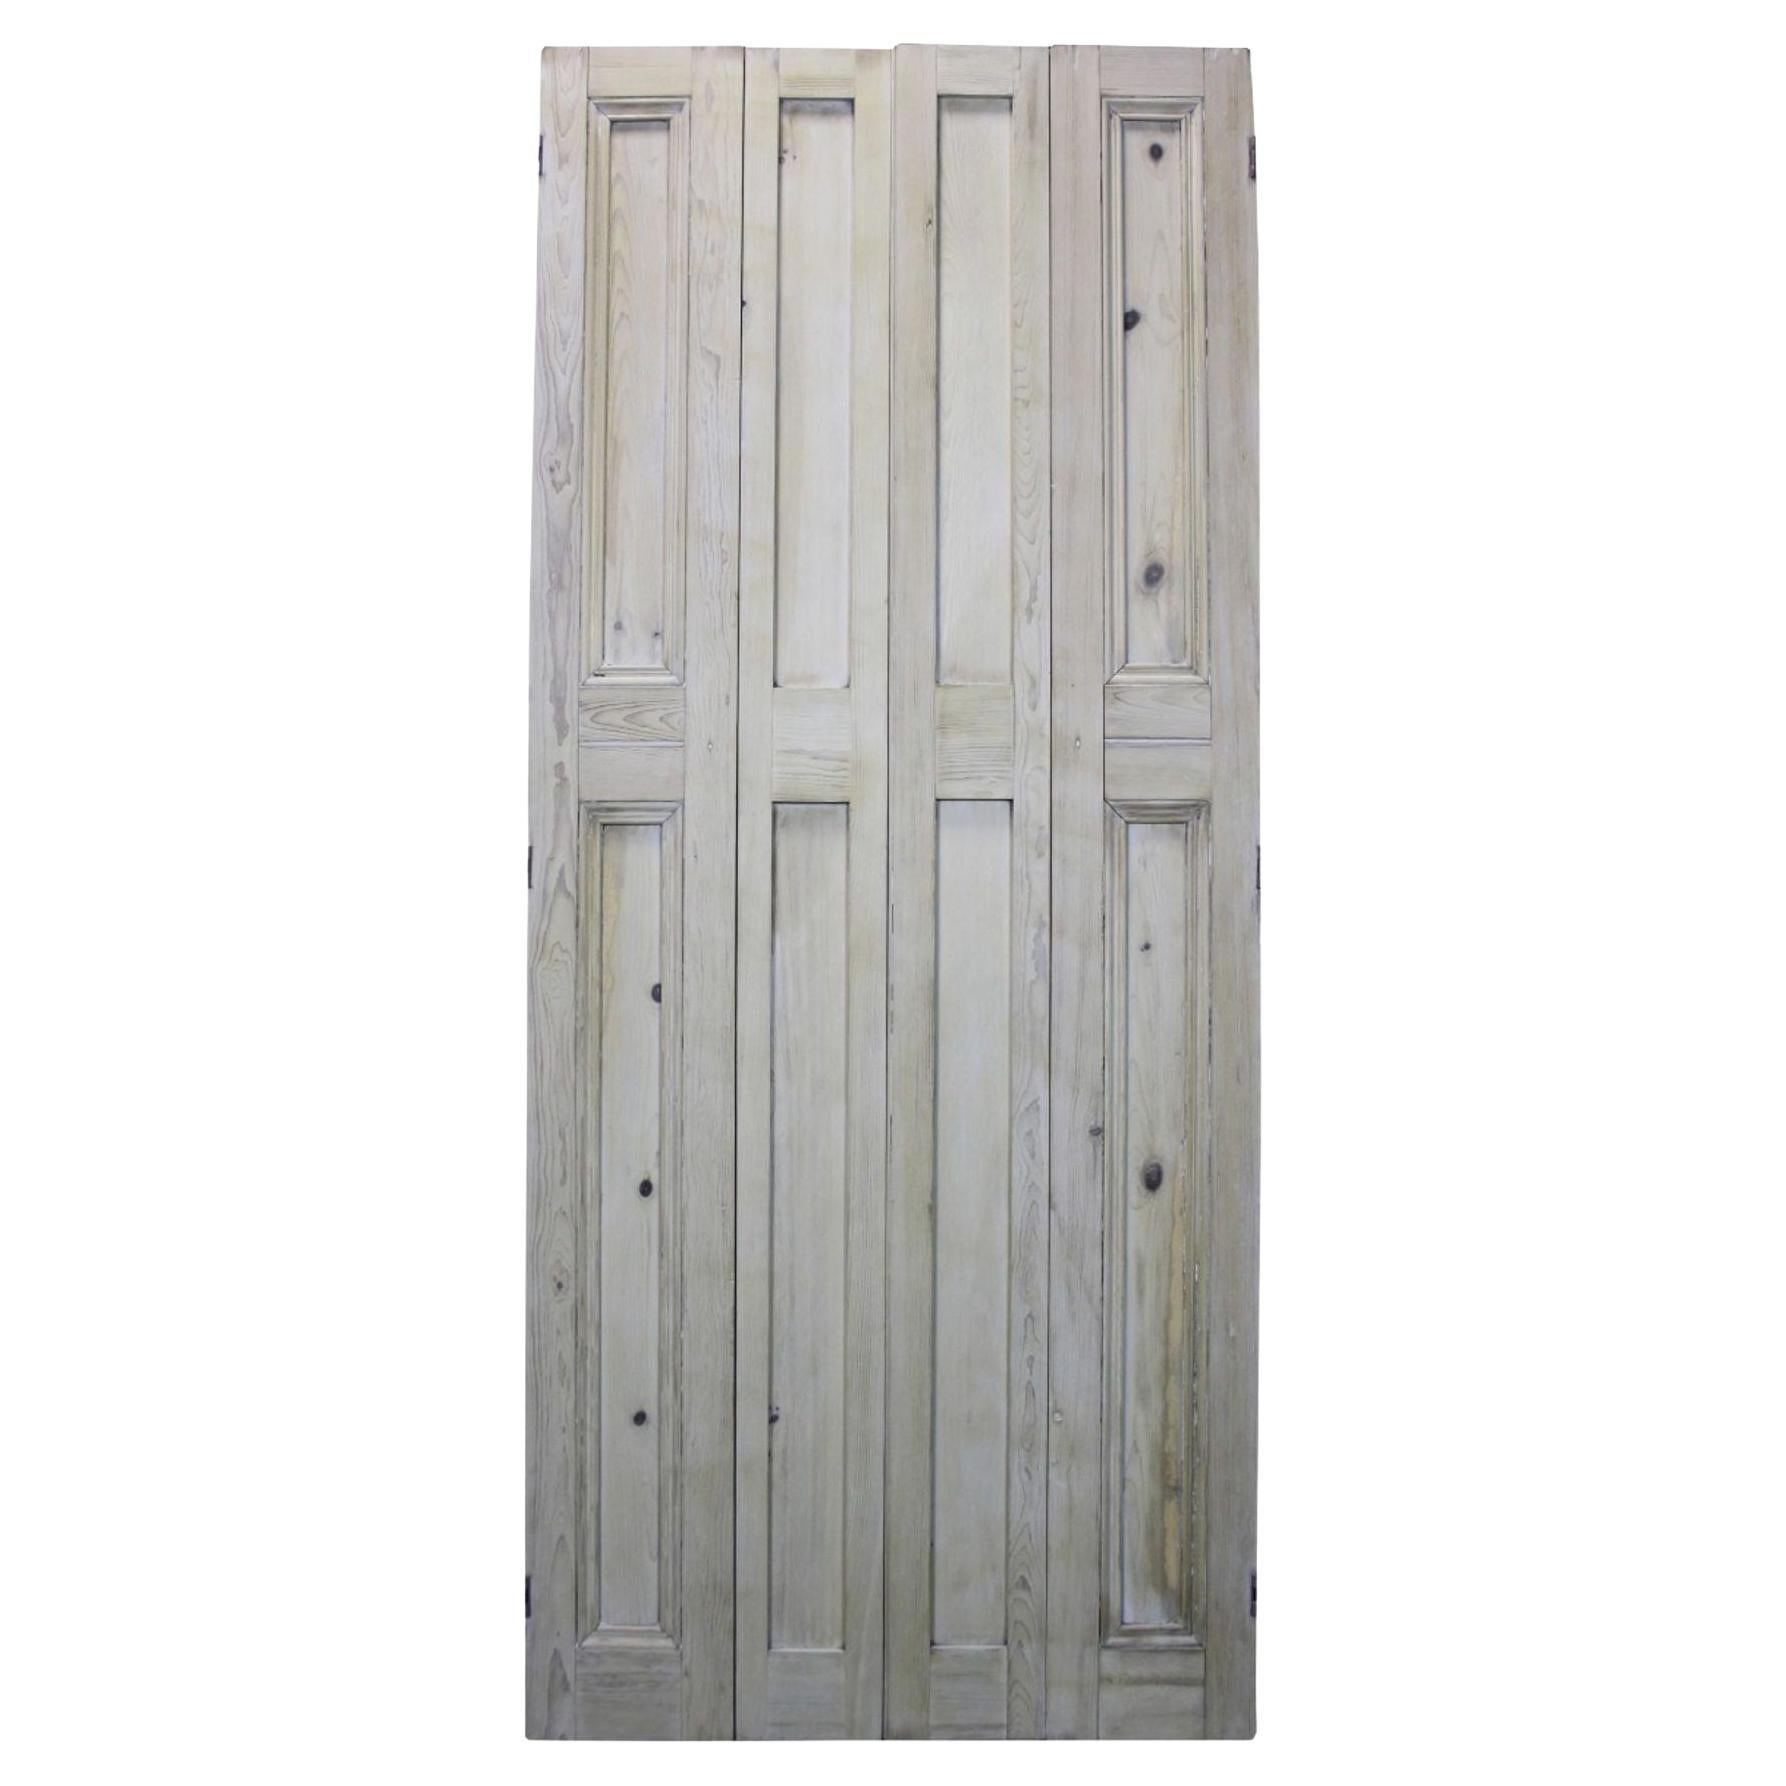 Set of Reclaimed Victorian Pine Window Shutters For Sale